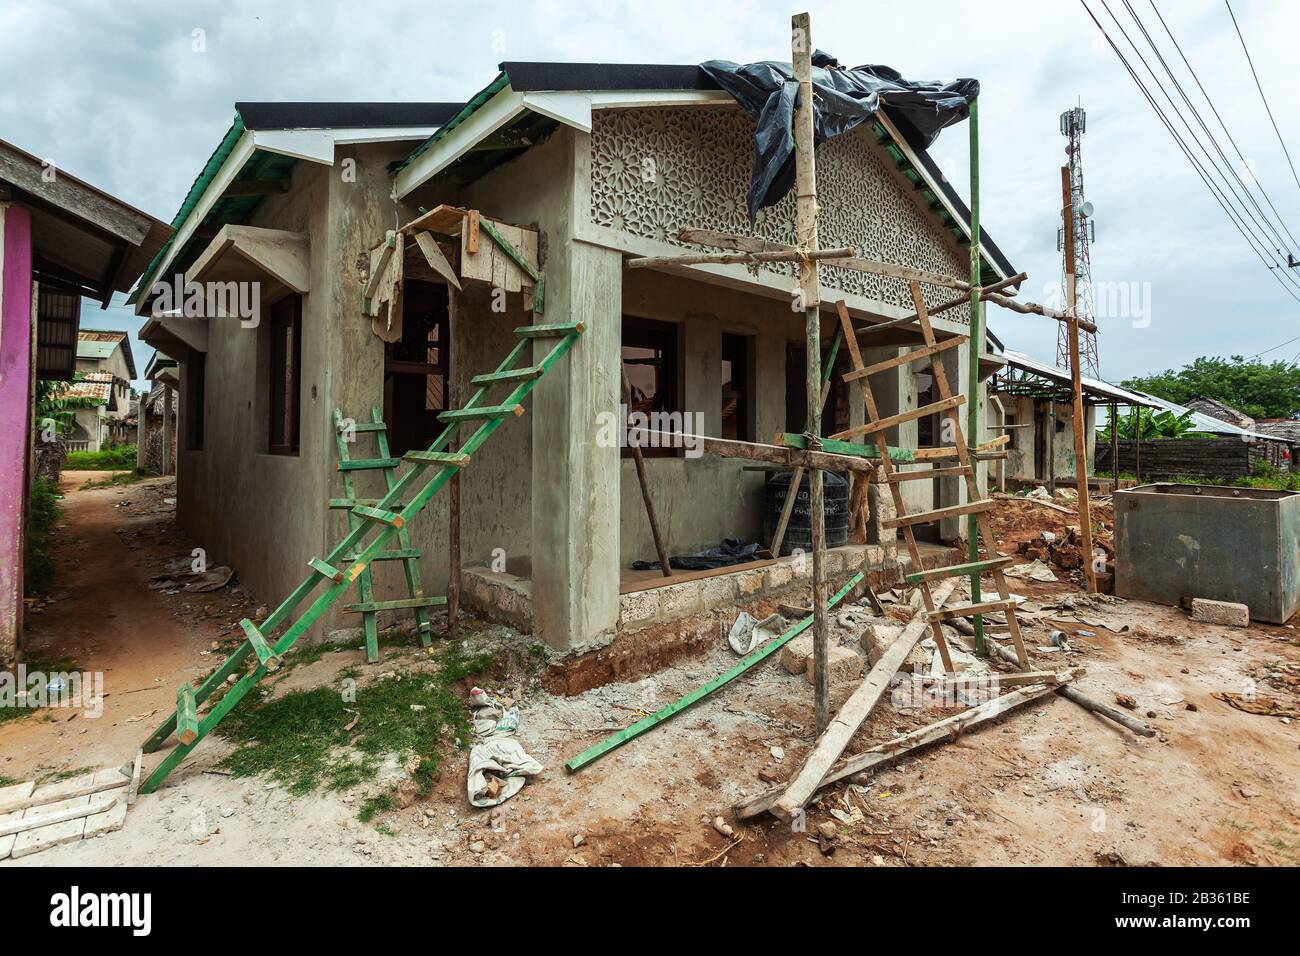 House being built in a village in Kenya Stock Photo